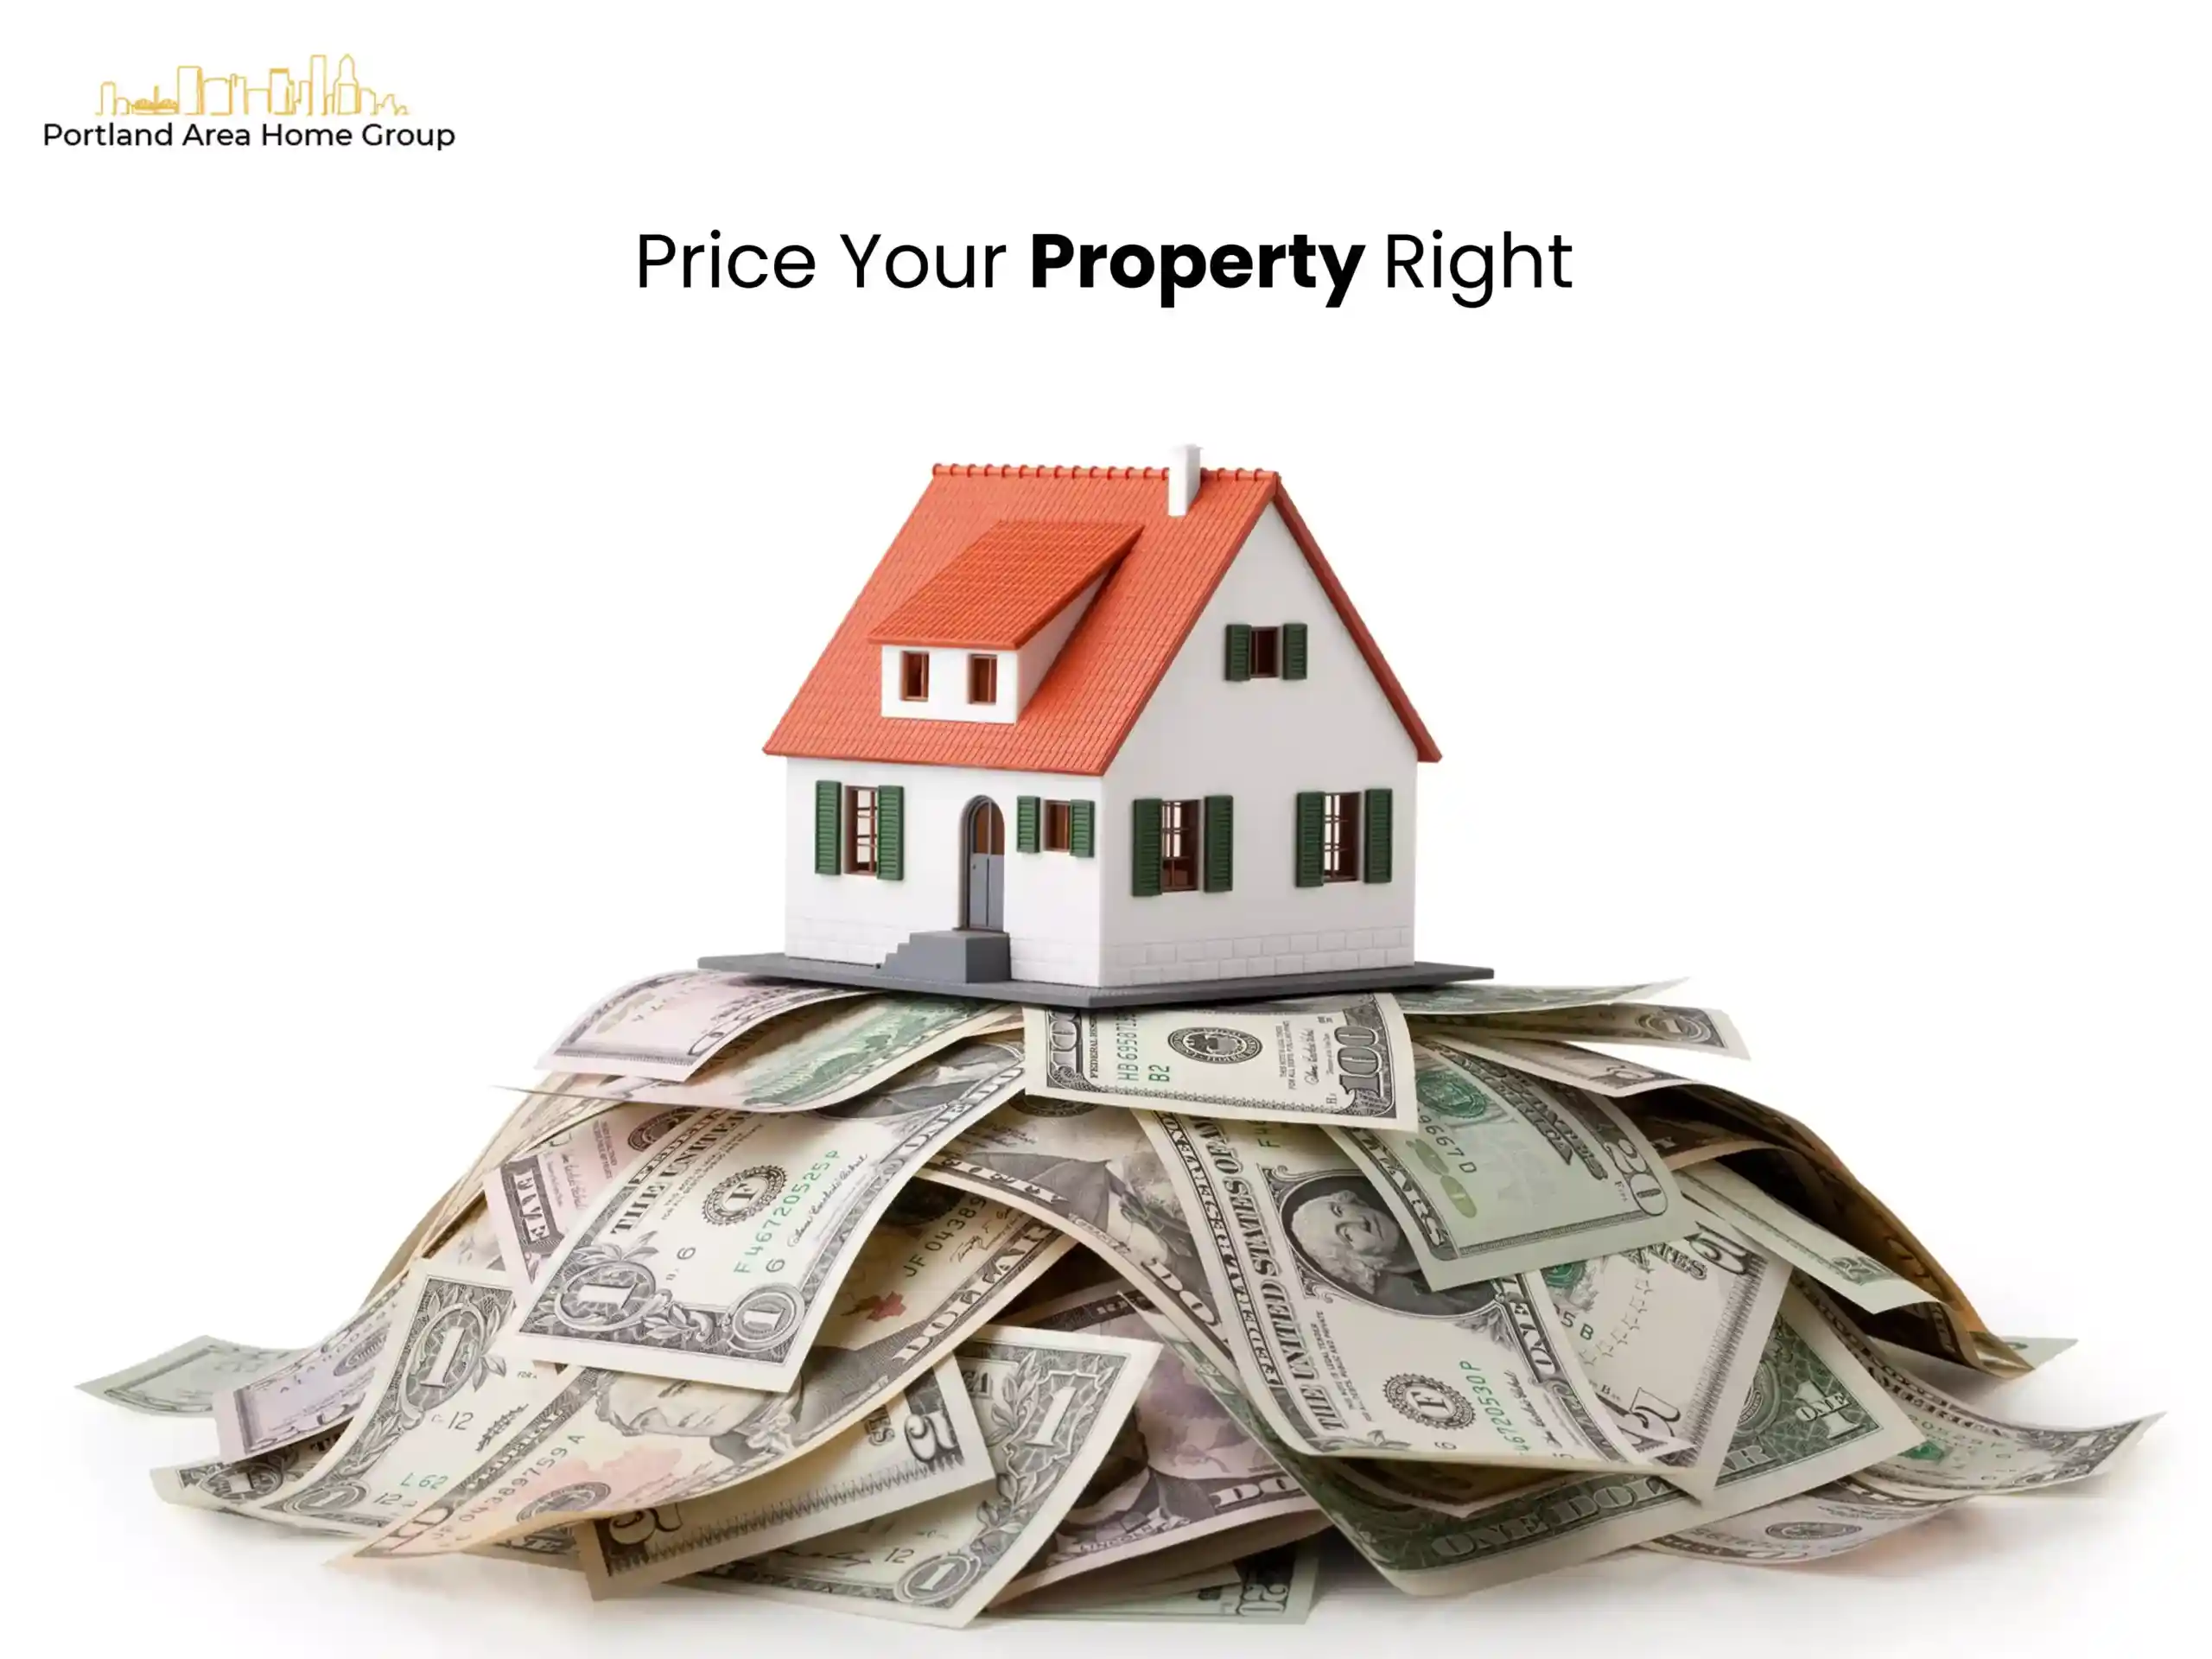 Price Your Property Right